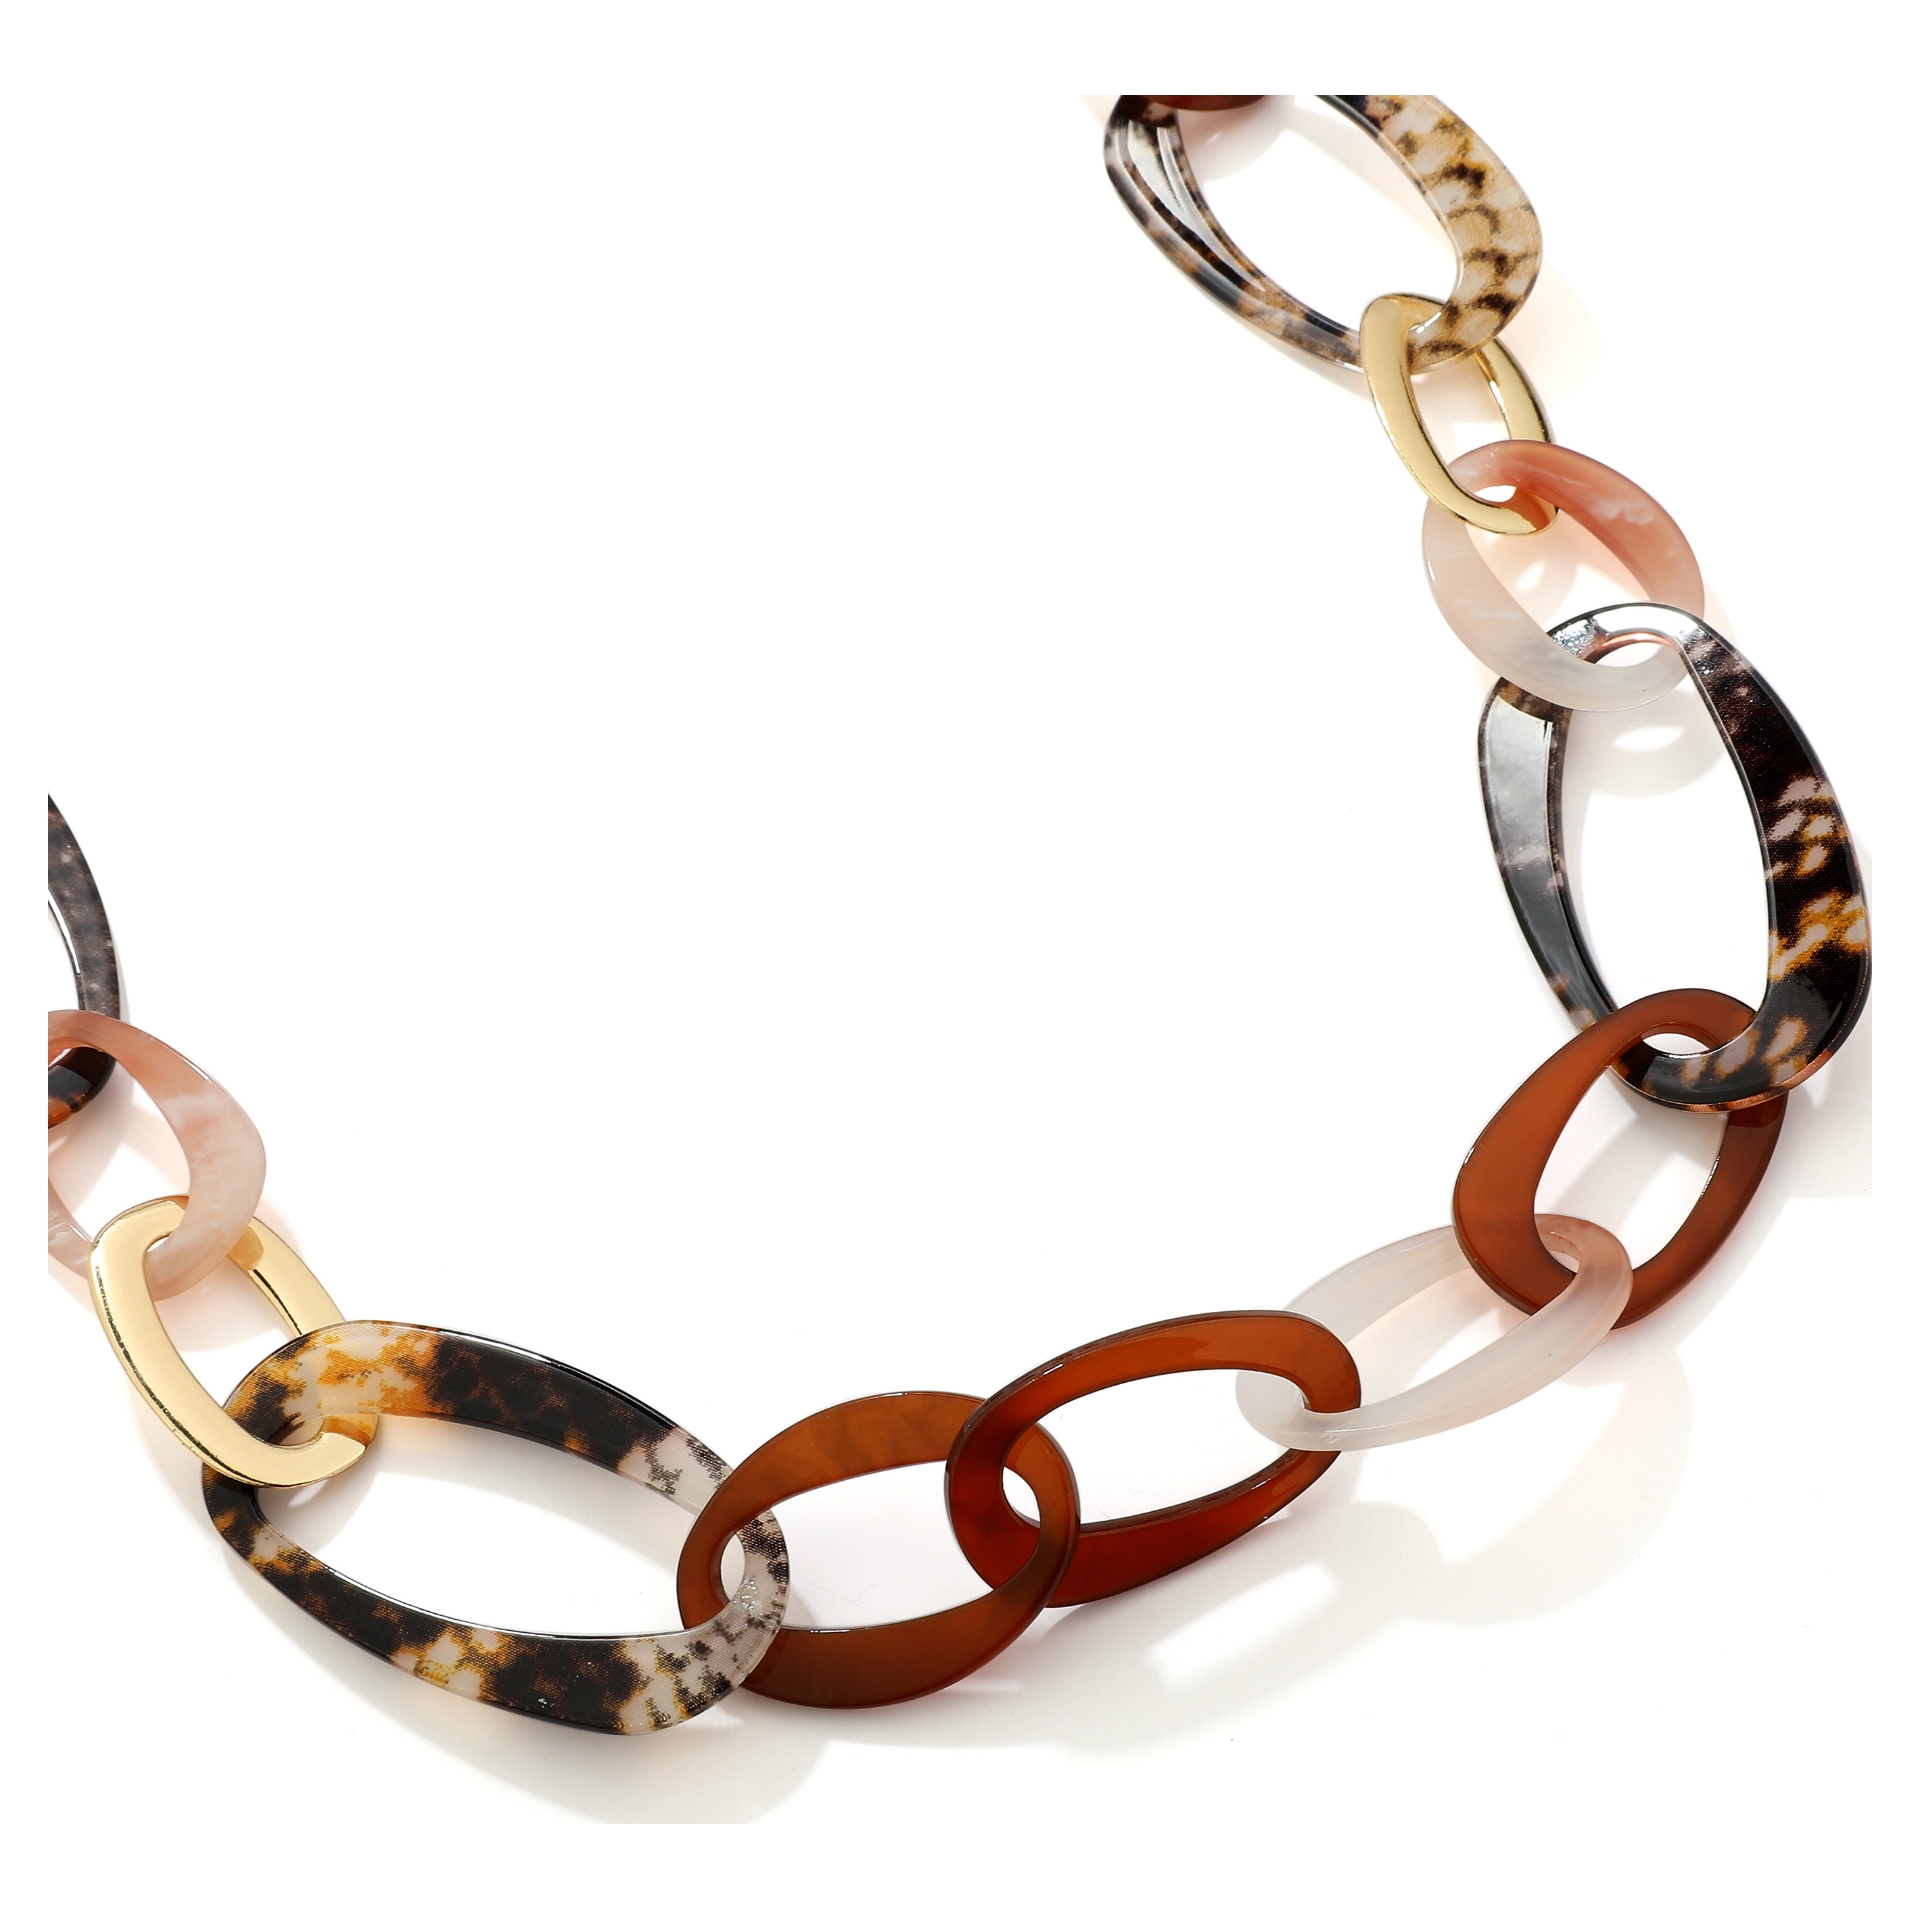 Interlinked Coffee Acrylic Rings with Scale Effects Necklace | JCUK